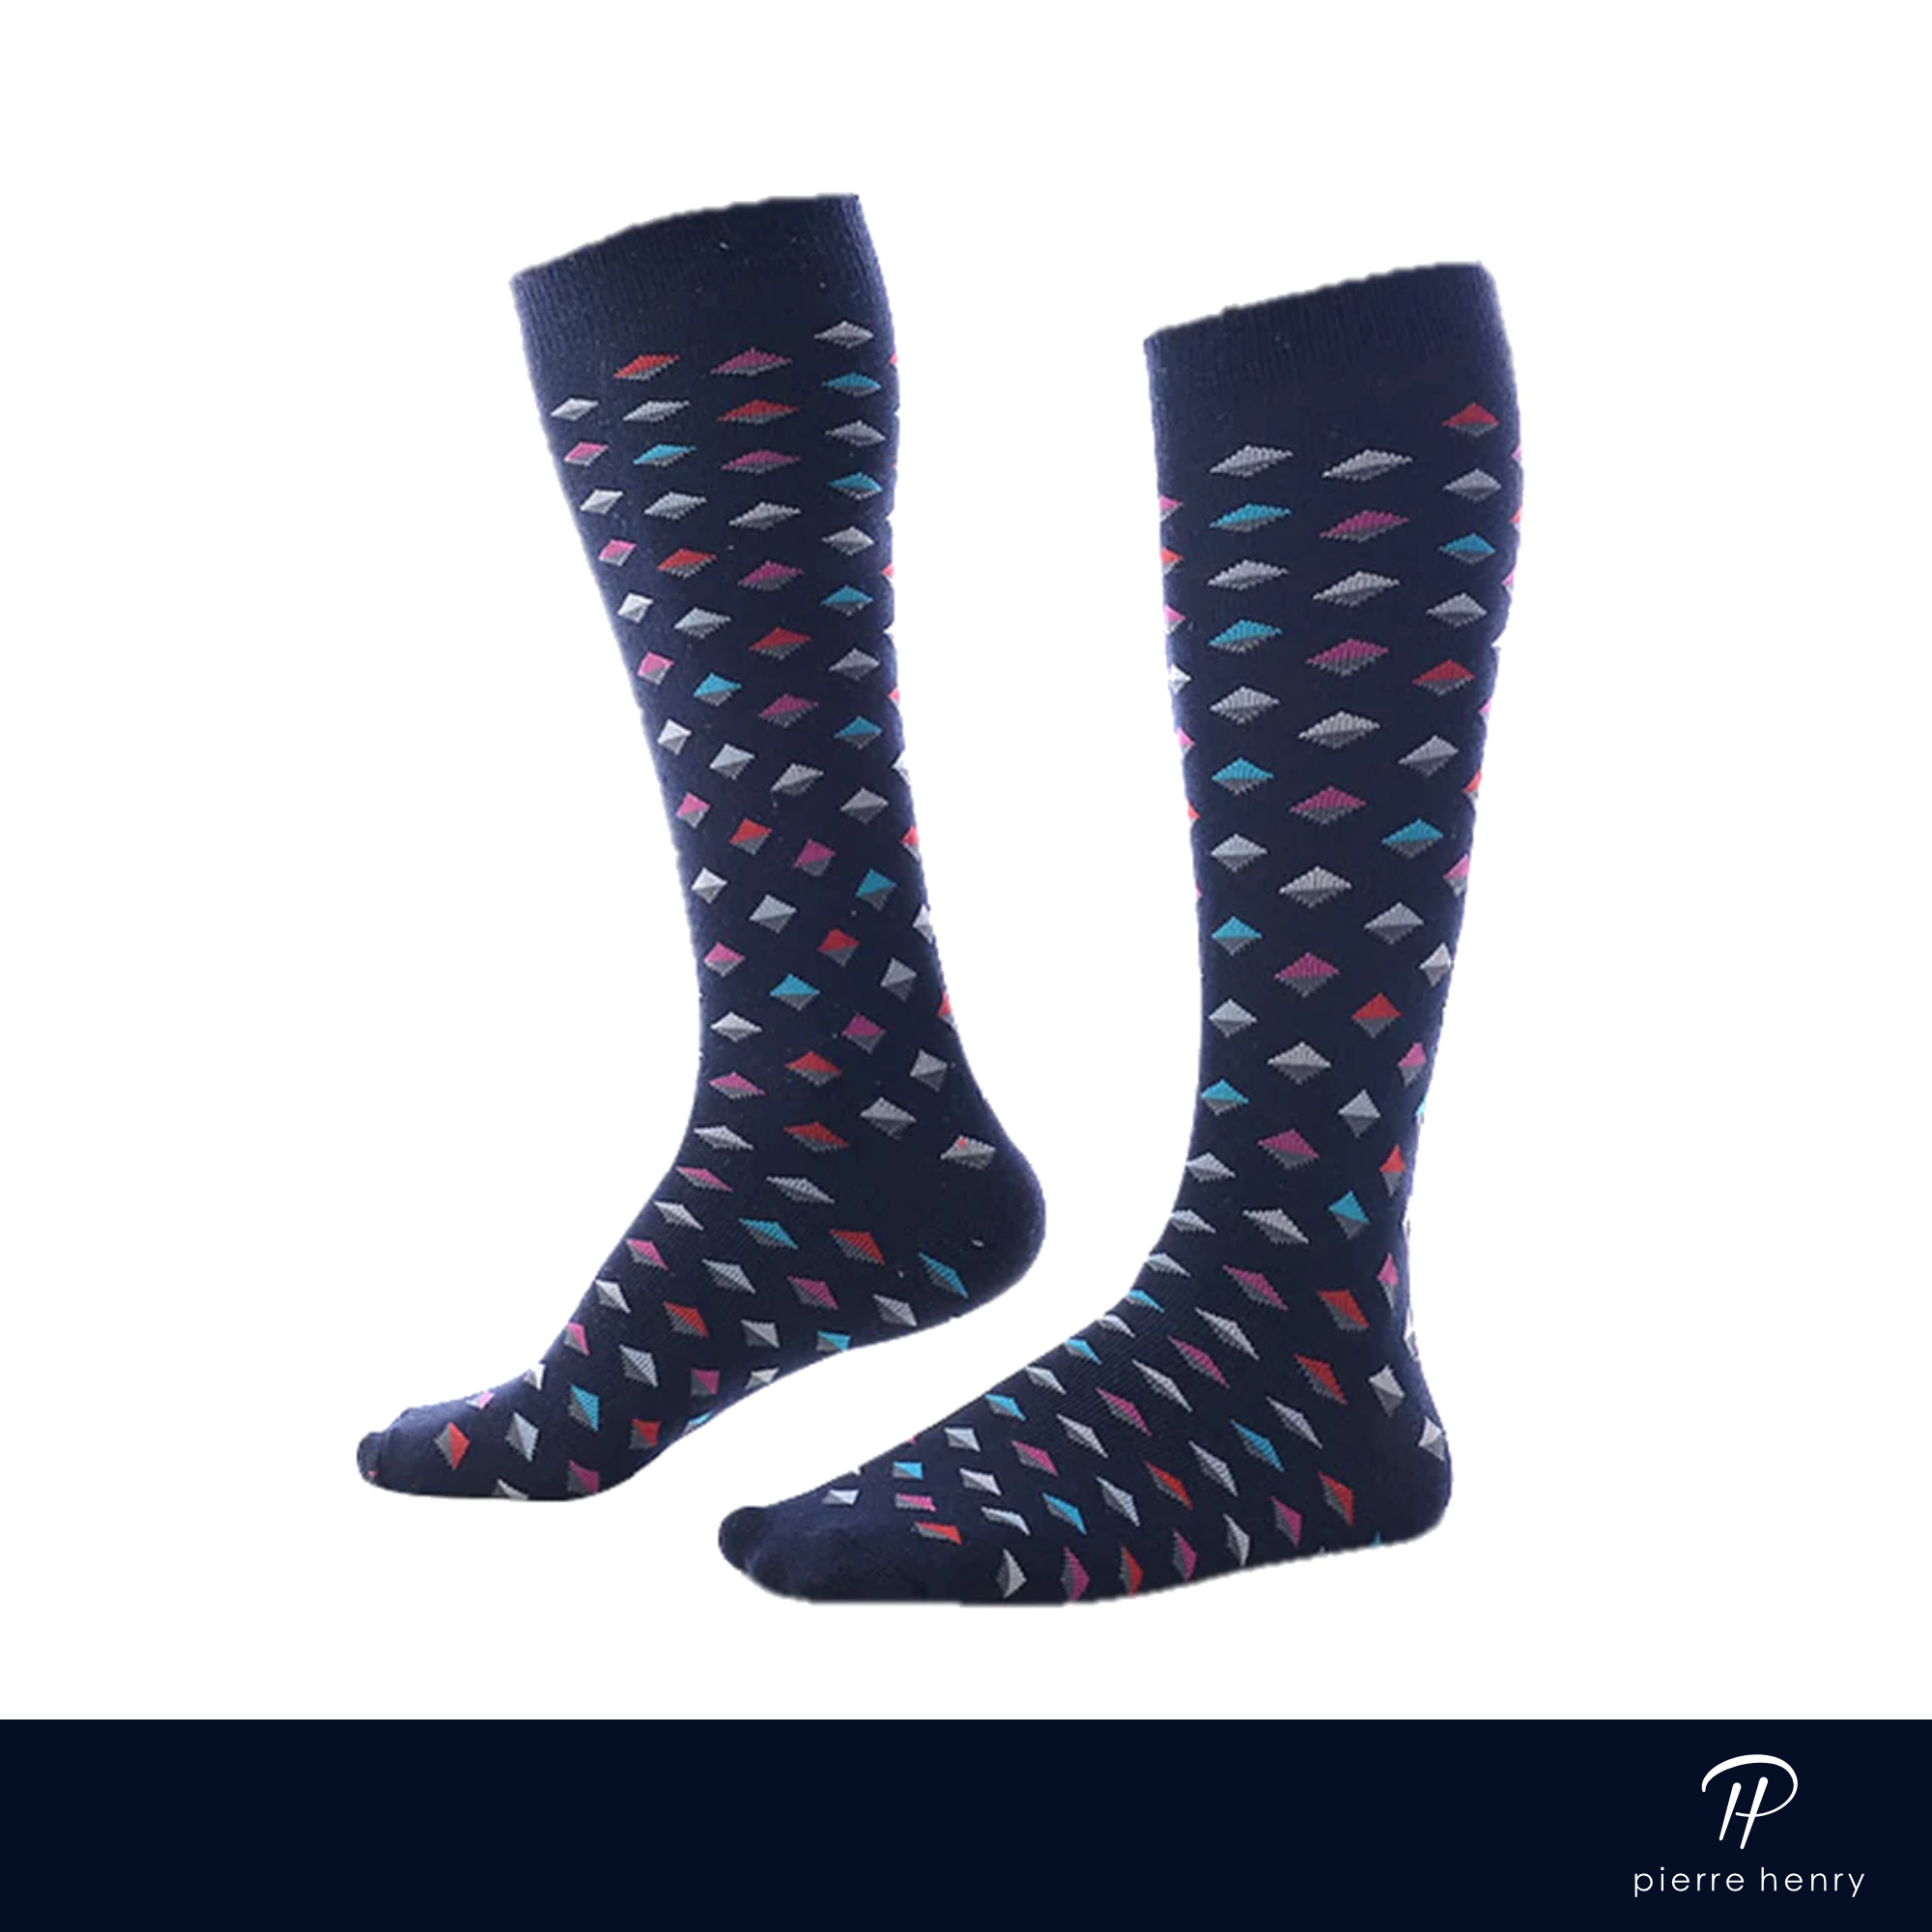 navy blue over the calf dress socks with various colored diamond prints